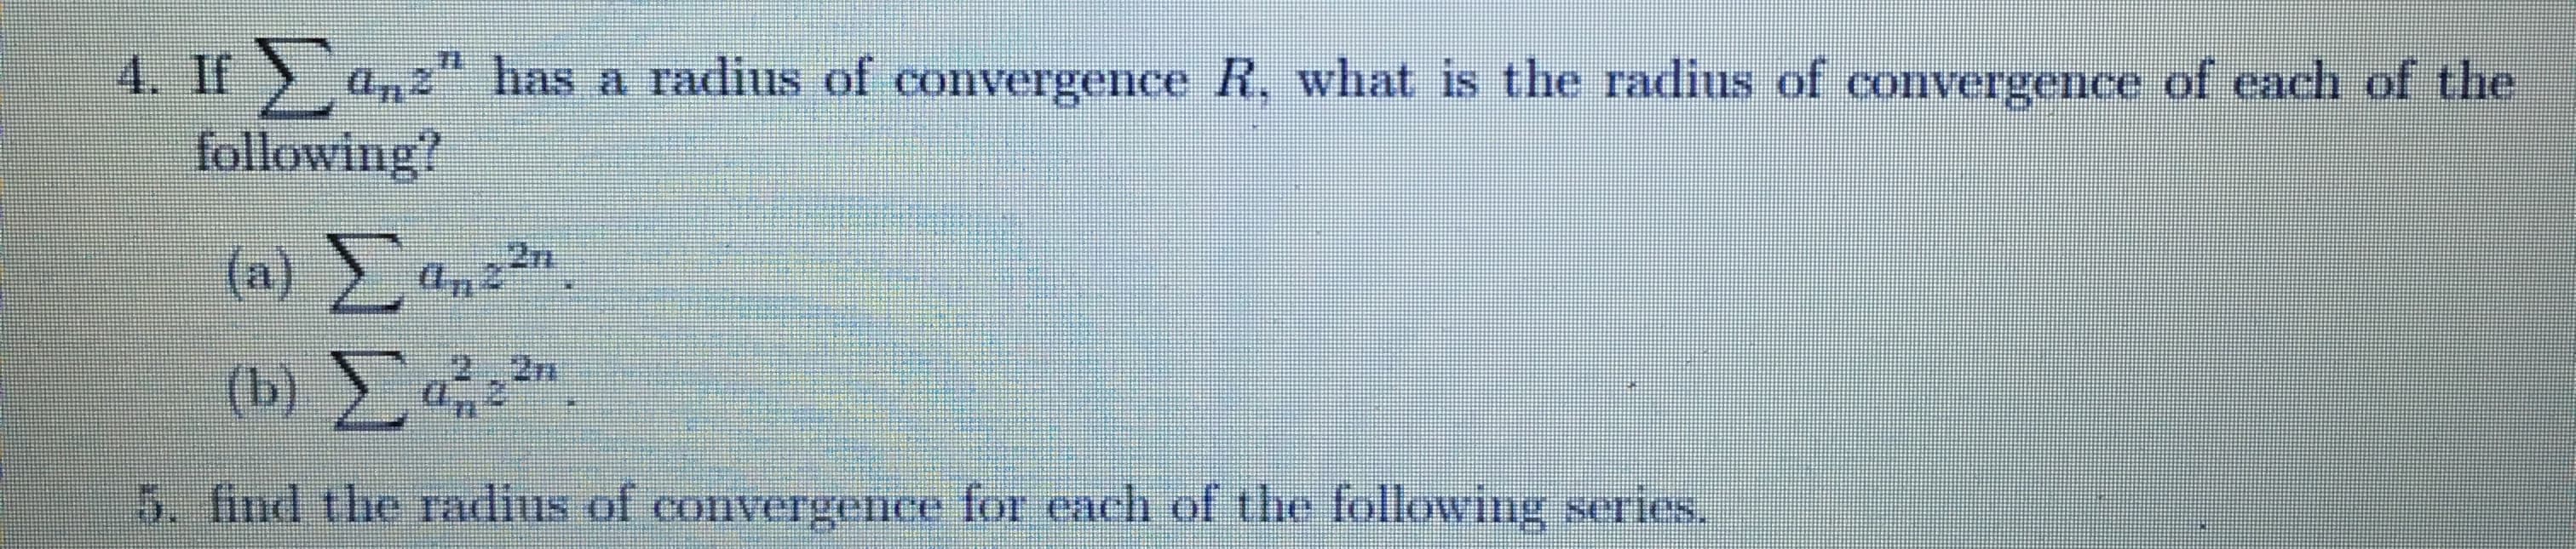 4. If a,z"
following?
has a radius of convergence R. what is the radius of convergence of each of the
(a) an2
2.2m
